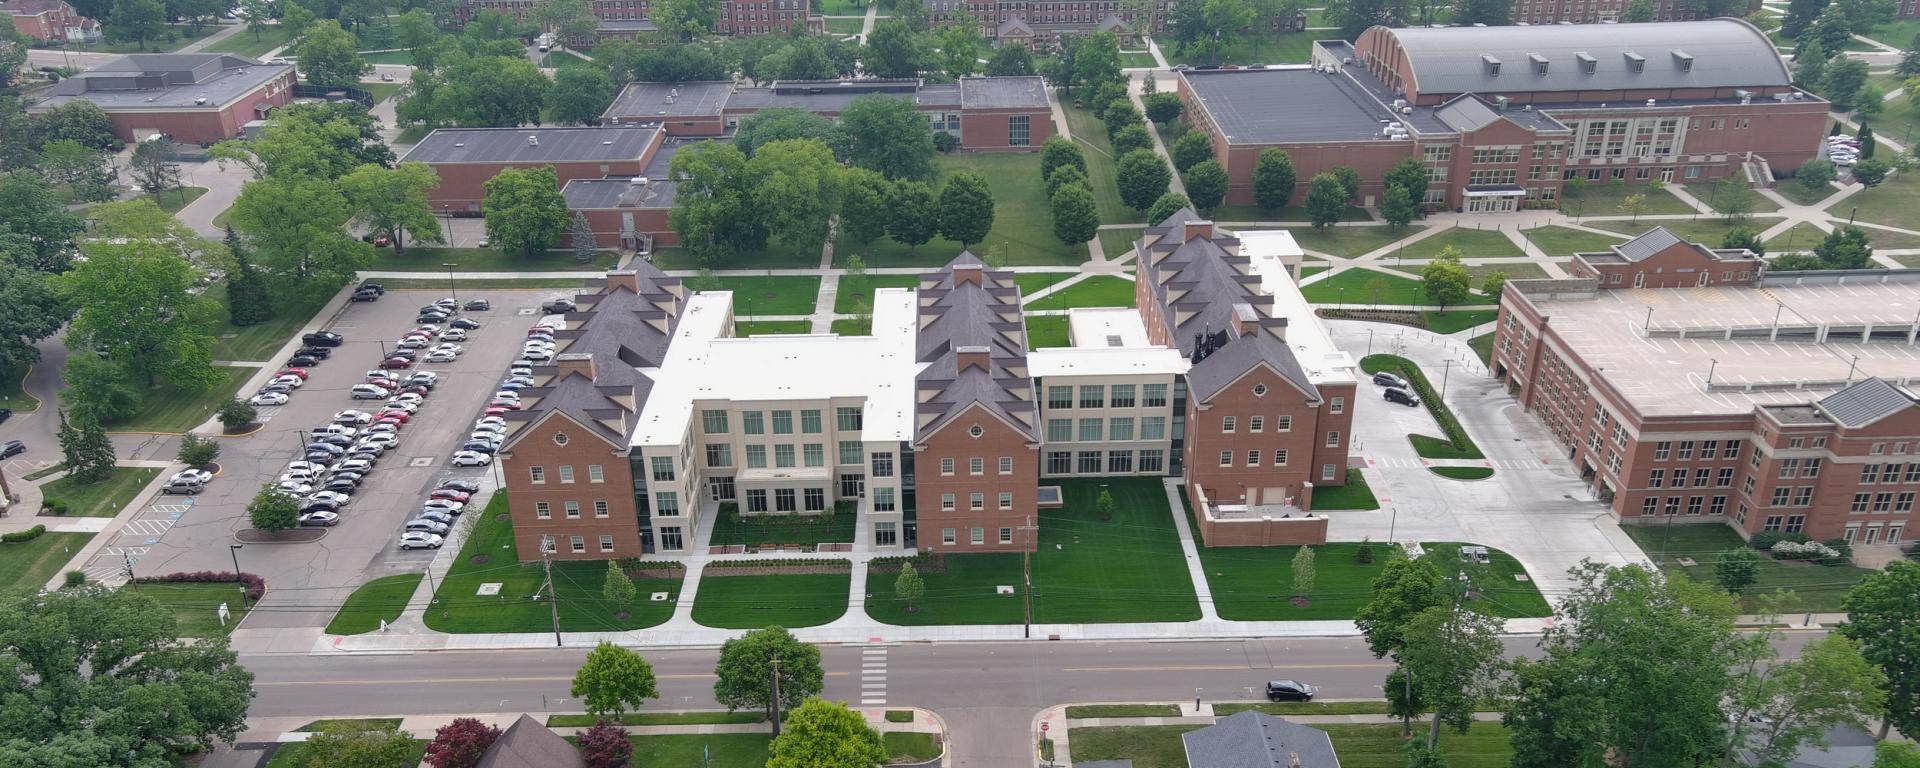 aerial photo of brick building and green lawn